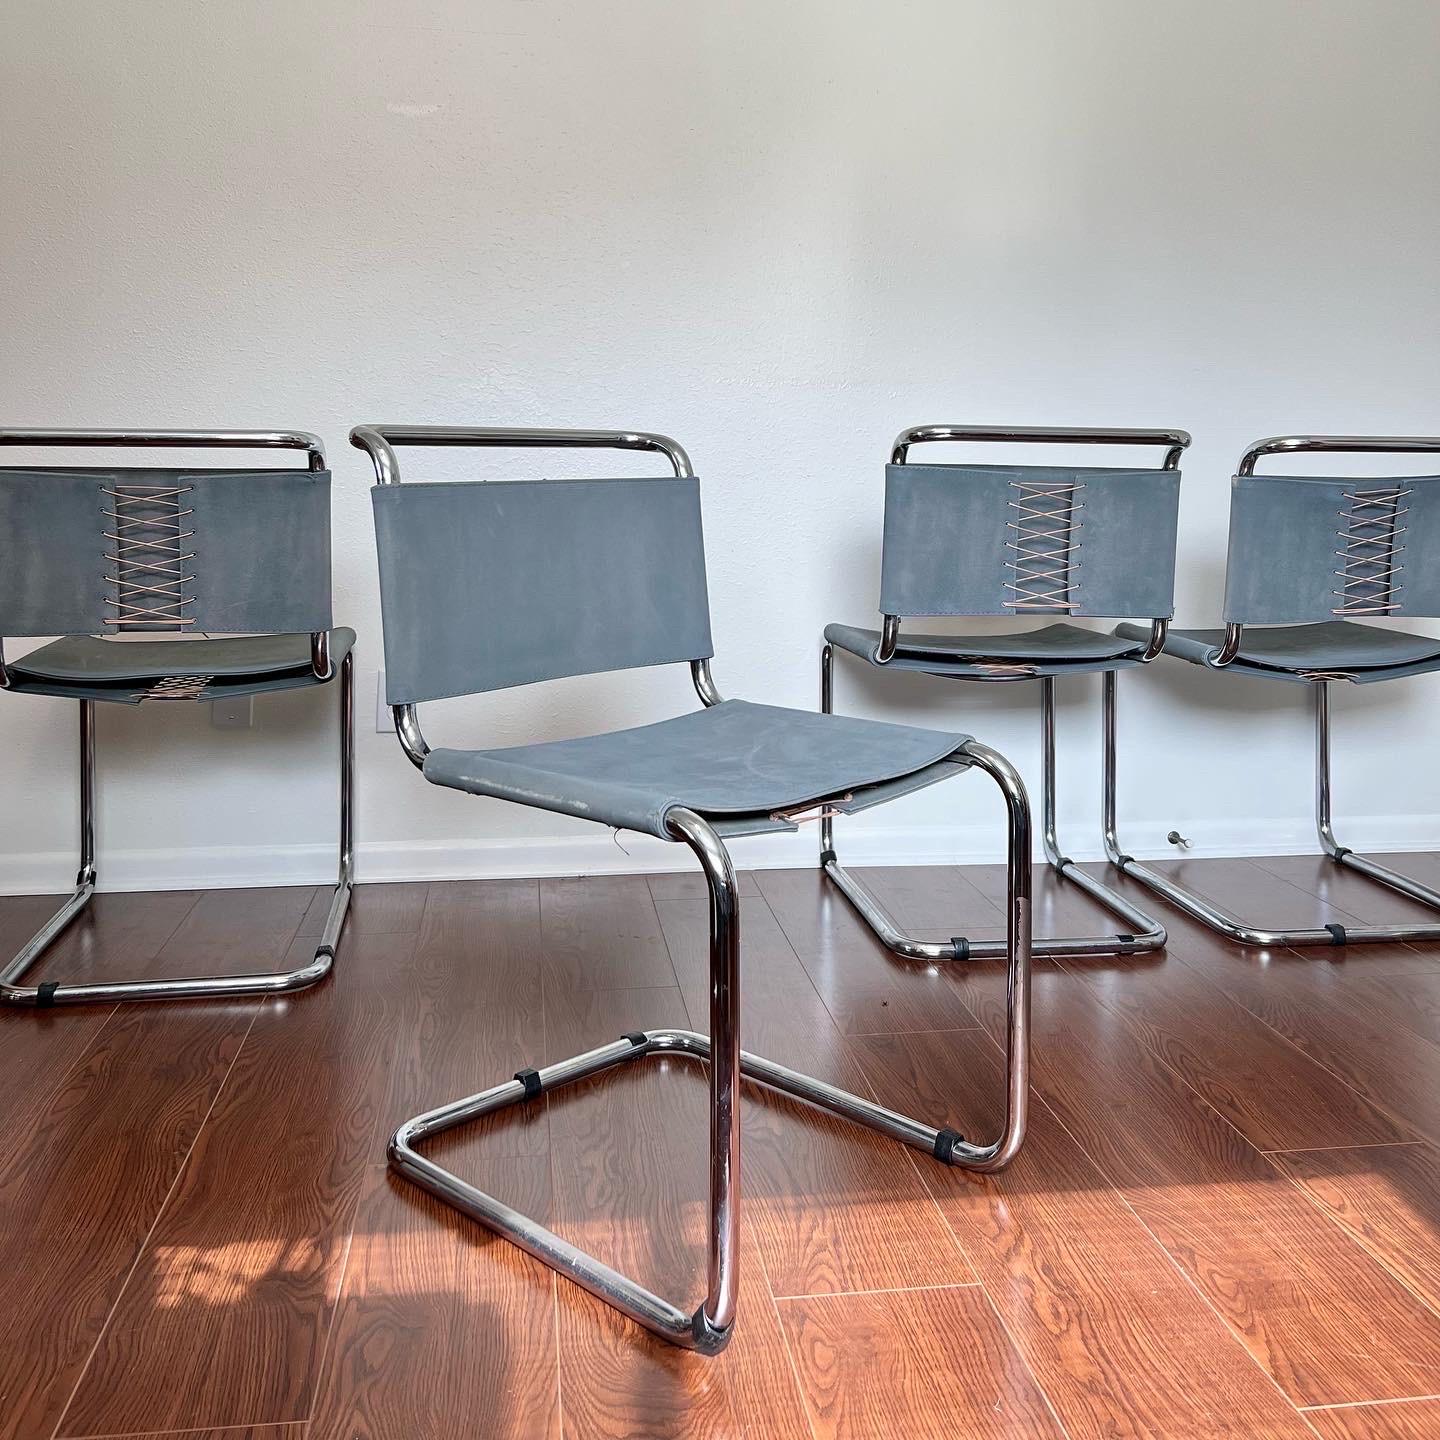 A set of 4 Marcel Breuer B33 dining chairs by Gavina from the 1950s. Upholstered in the original canvas gray fabric and the backs are held together by laces which are in great condition. Chrome has normal wear for age, and one chair has a bit more